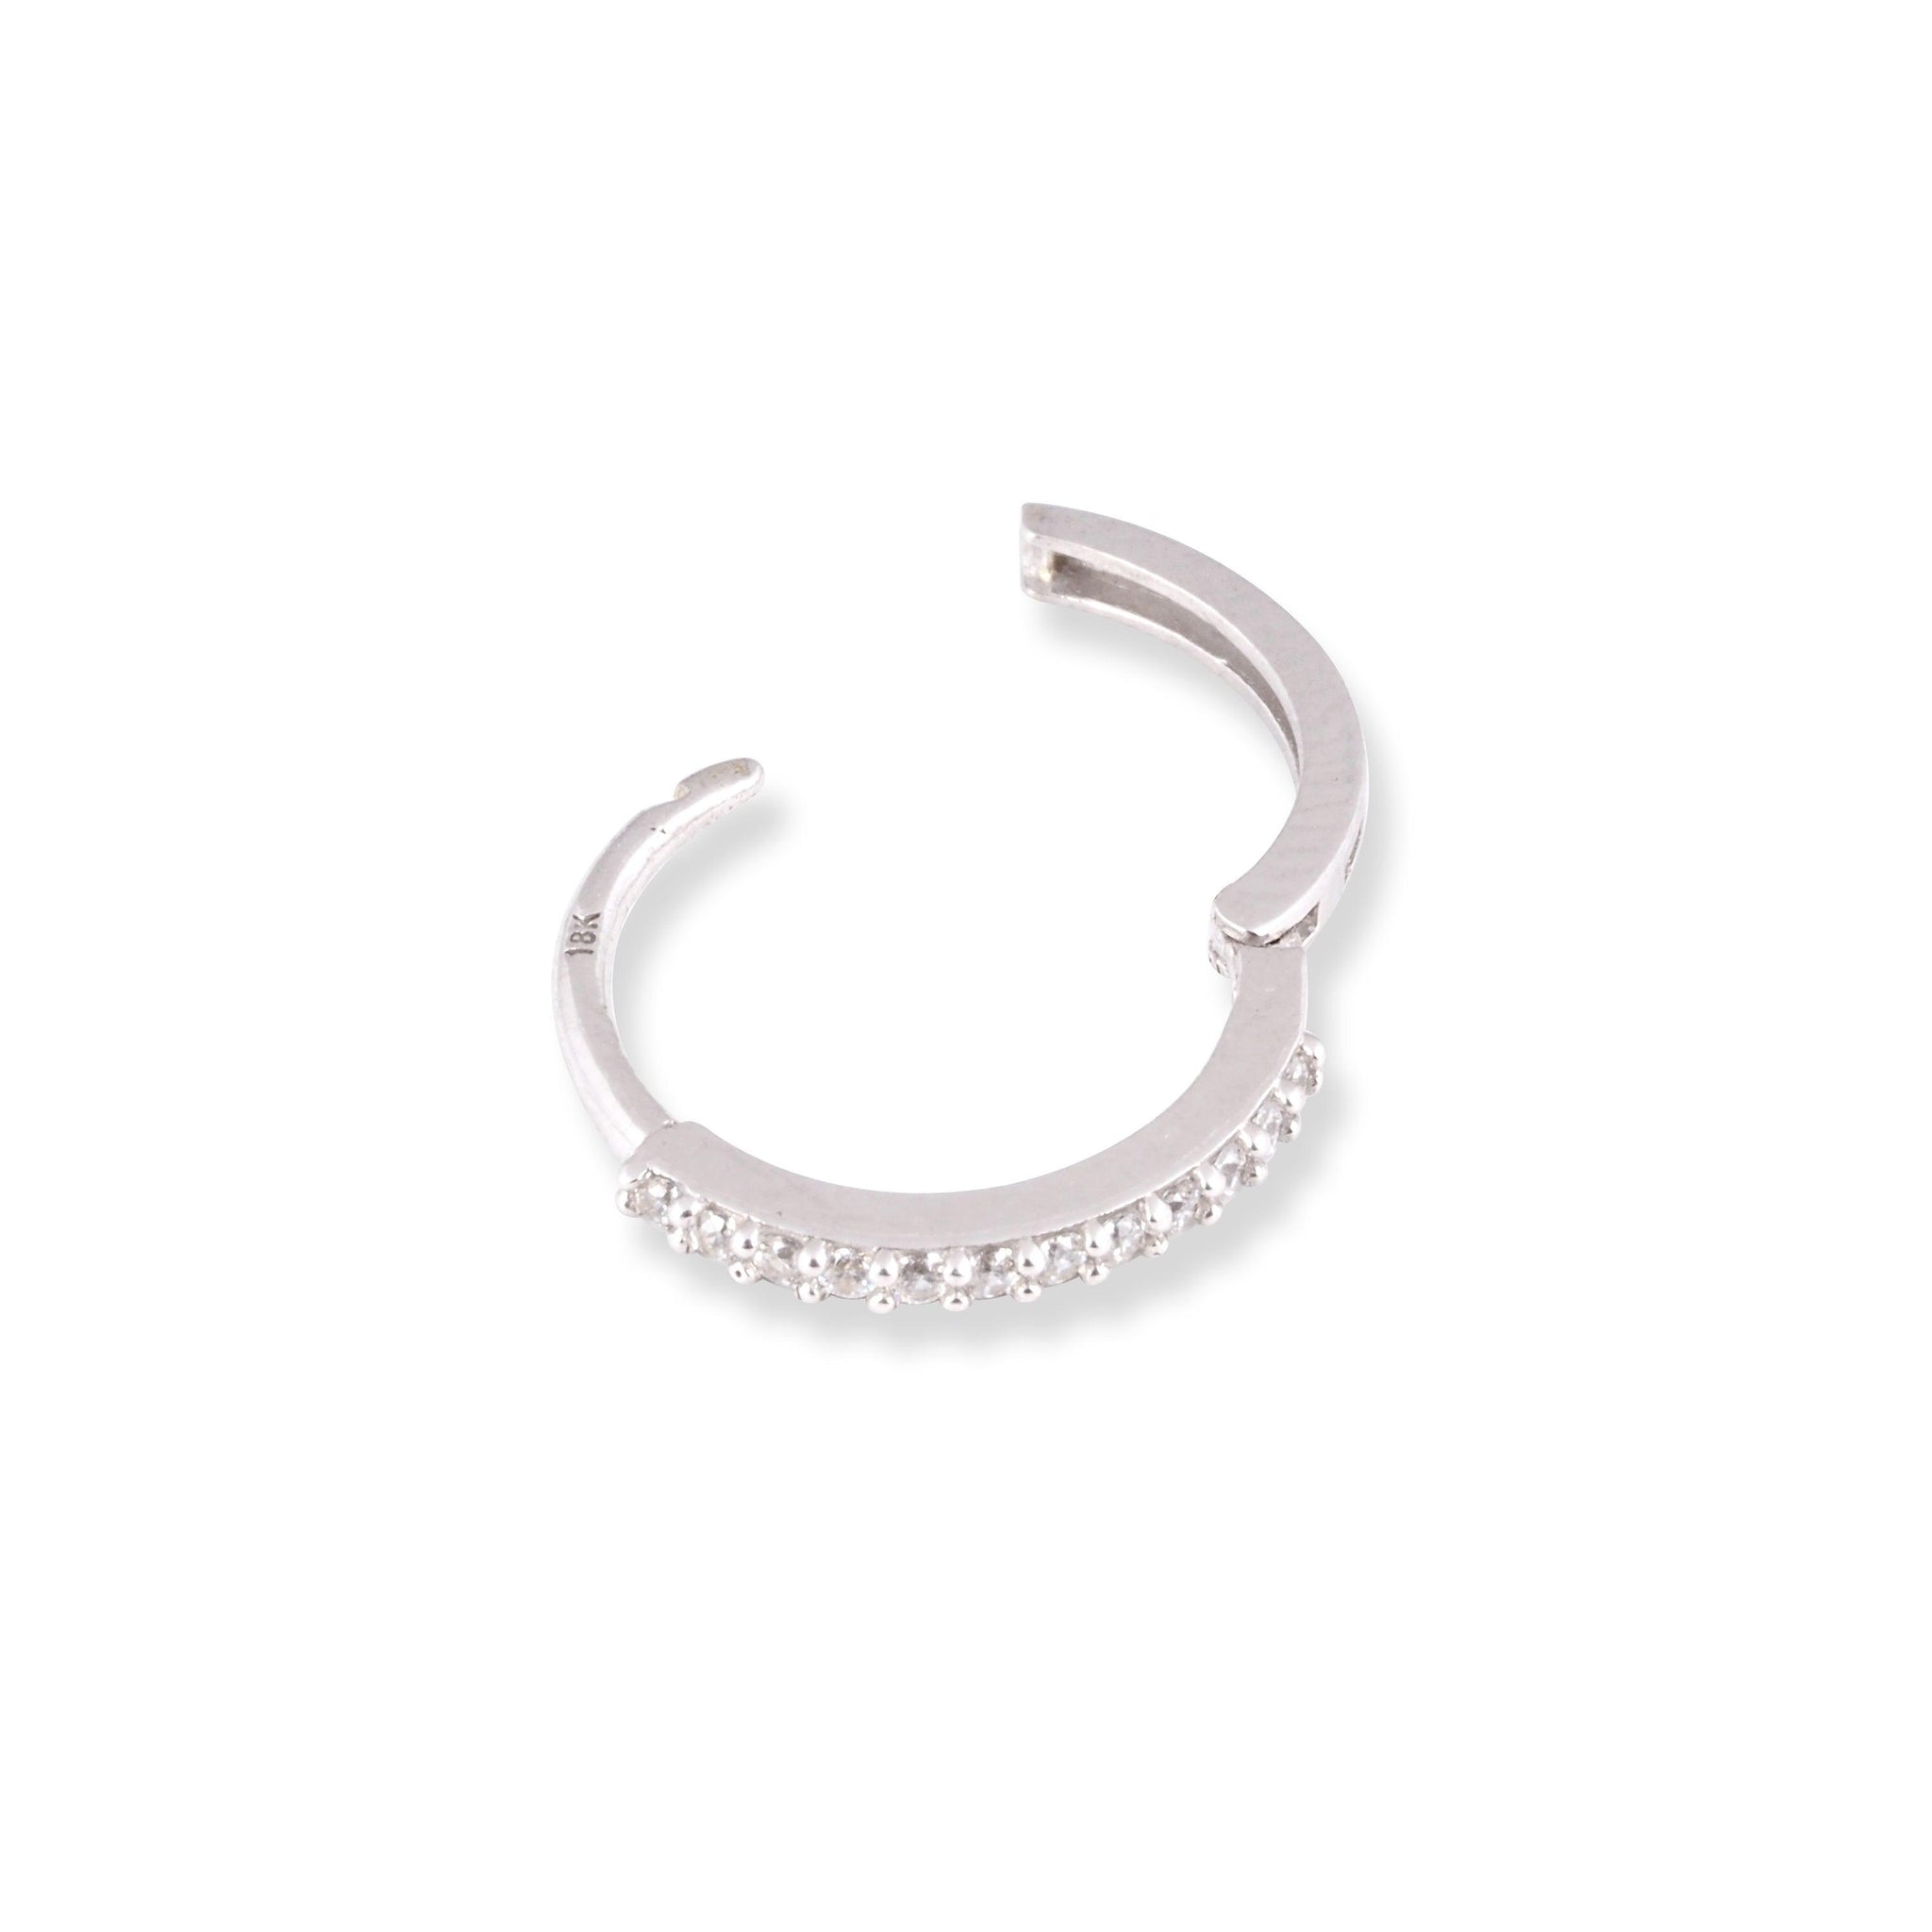 18ct Yellow / White Gold Nose Ring With Cubic Zirconia Stones (6mm-12mm) NR-7833